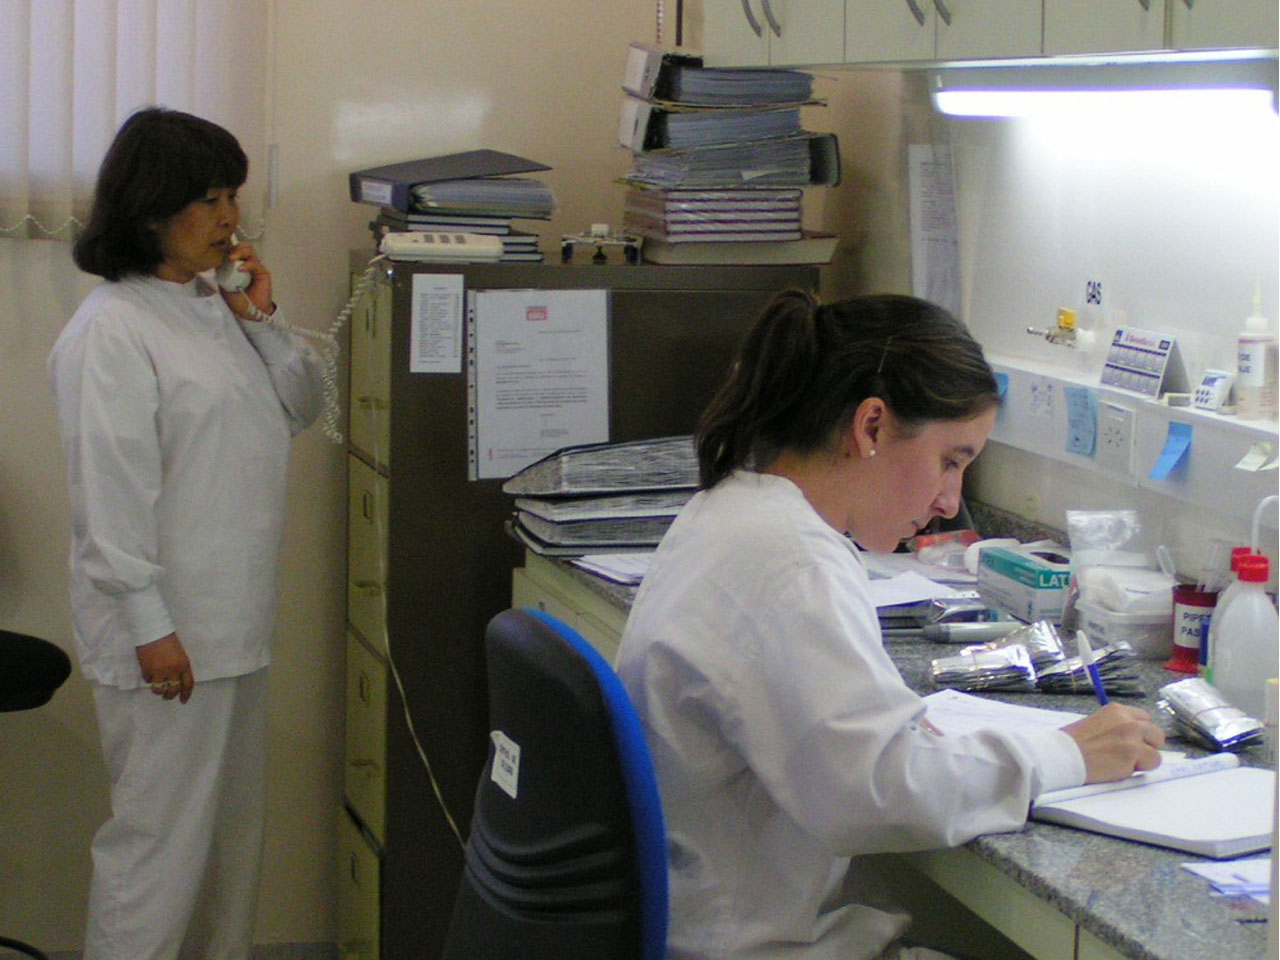 Quality control office of a biotech company, Argentina